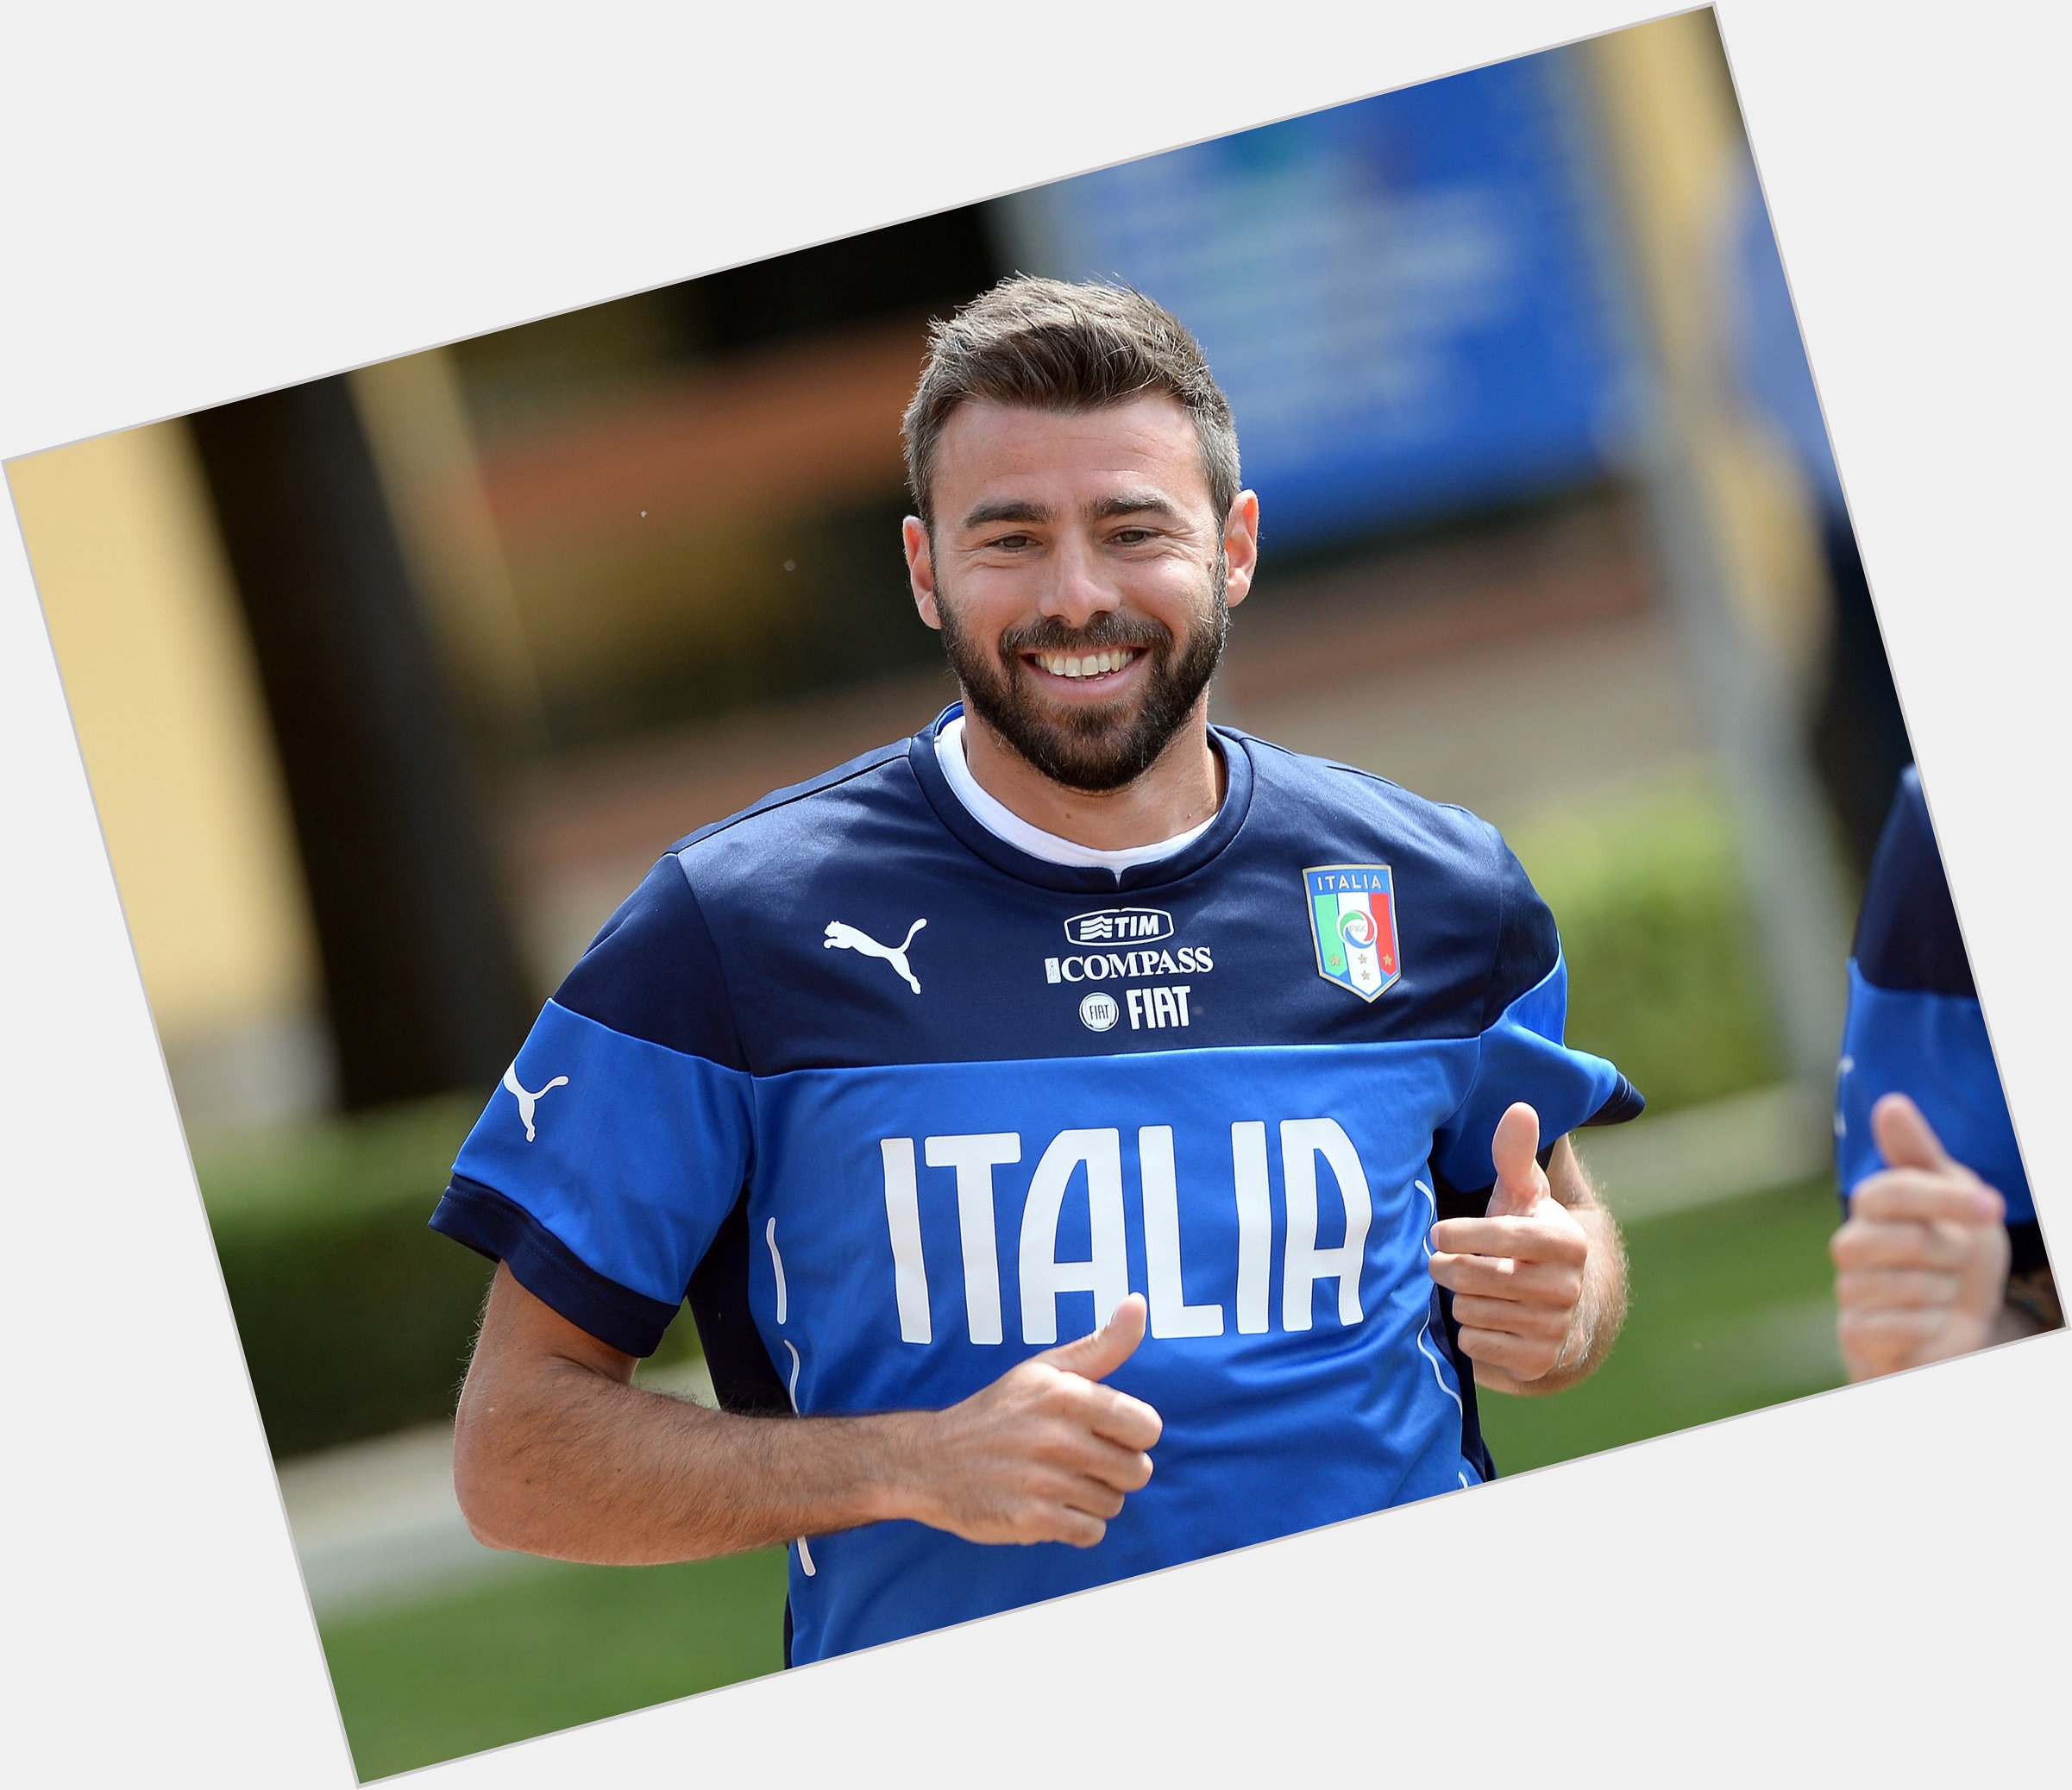 <a href="/hot-men/andrea-barzagli/where-dating-news-photos">Andrea Barzagli</a> Athletic body,  light brown hair & hairstyles